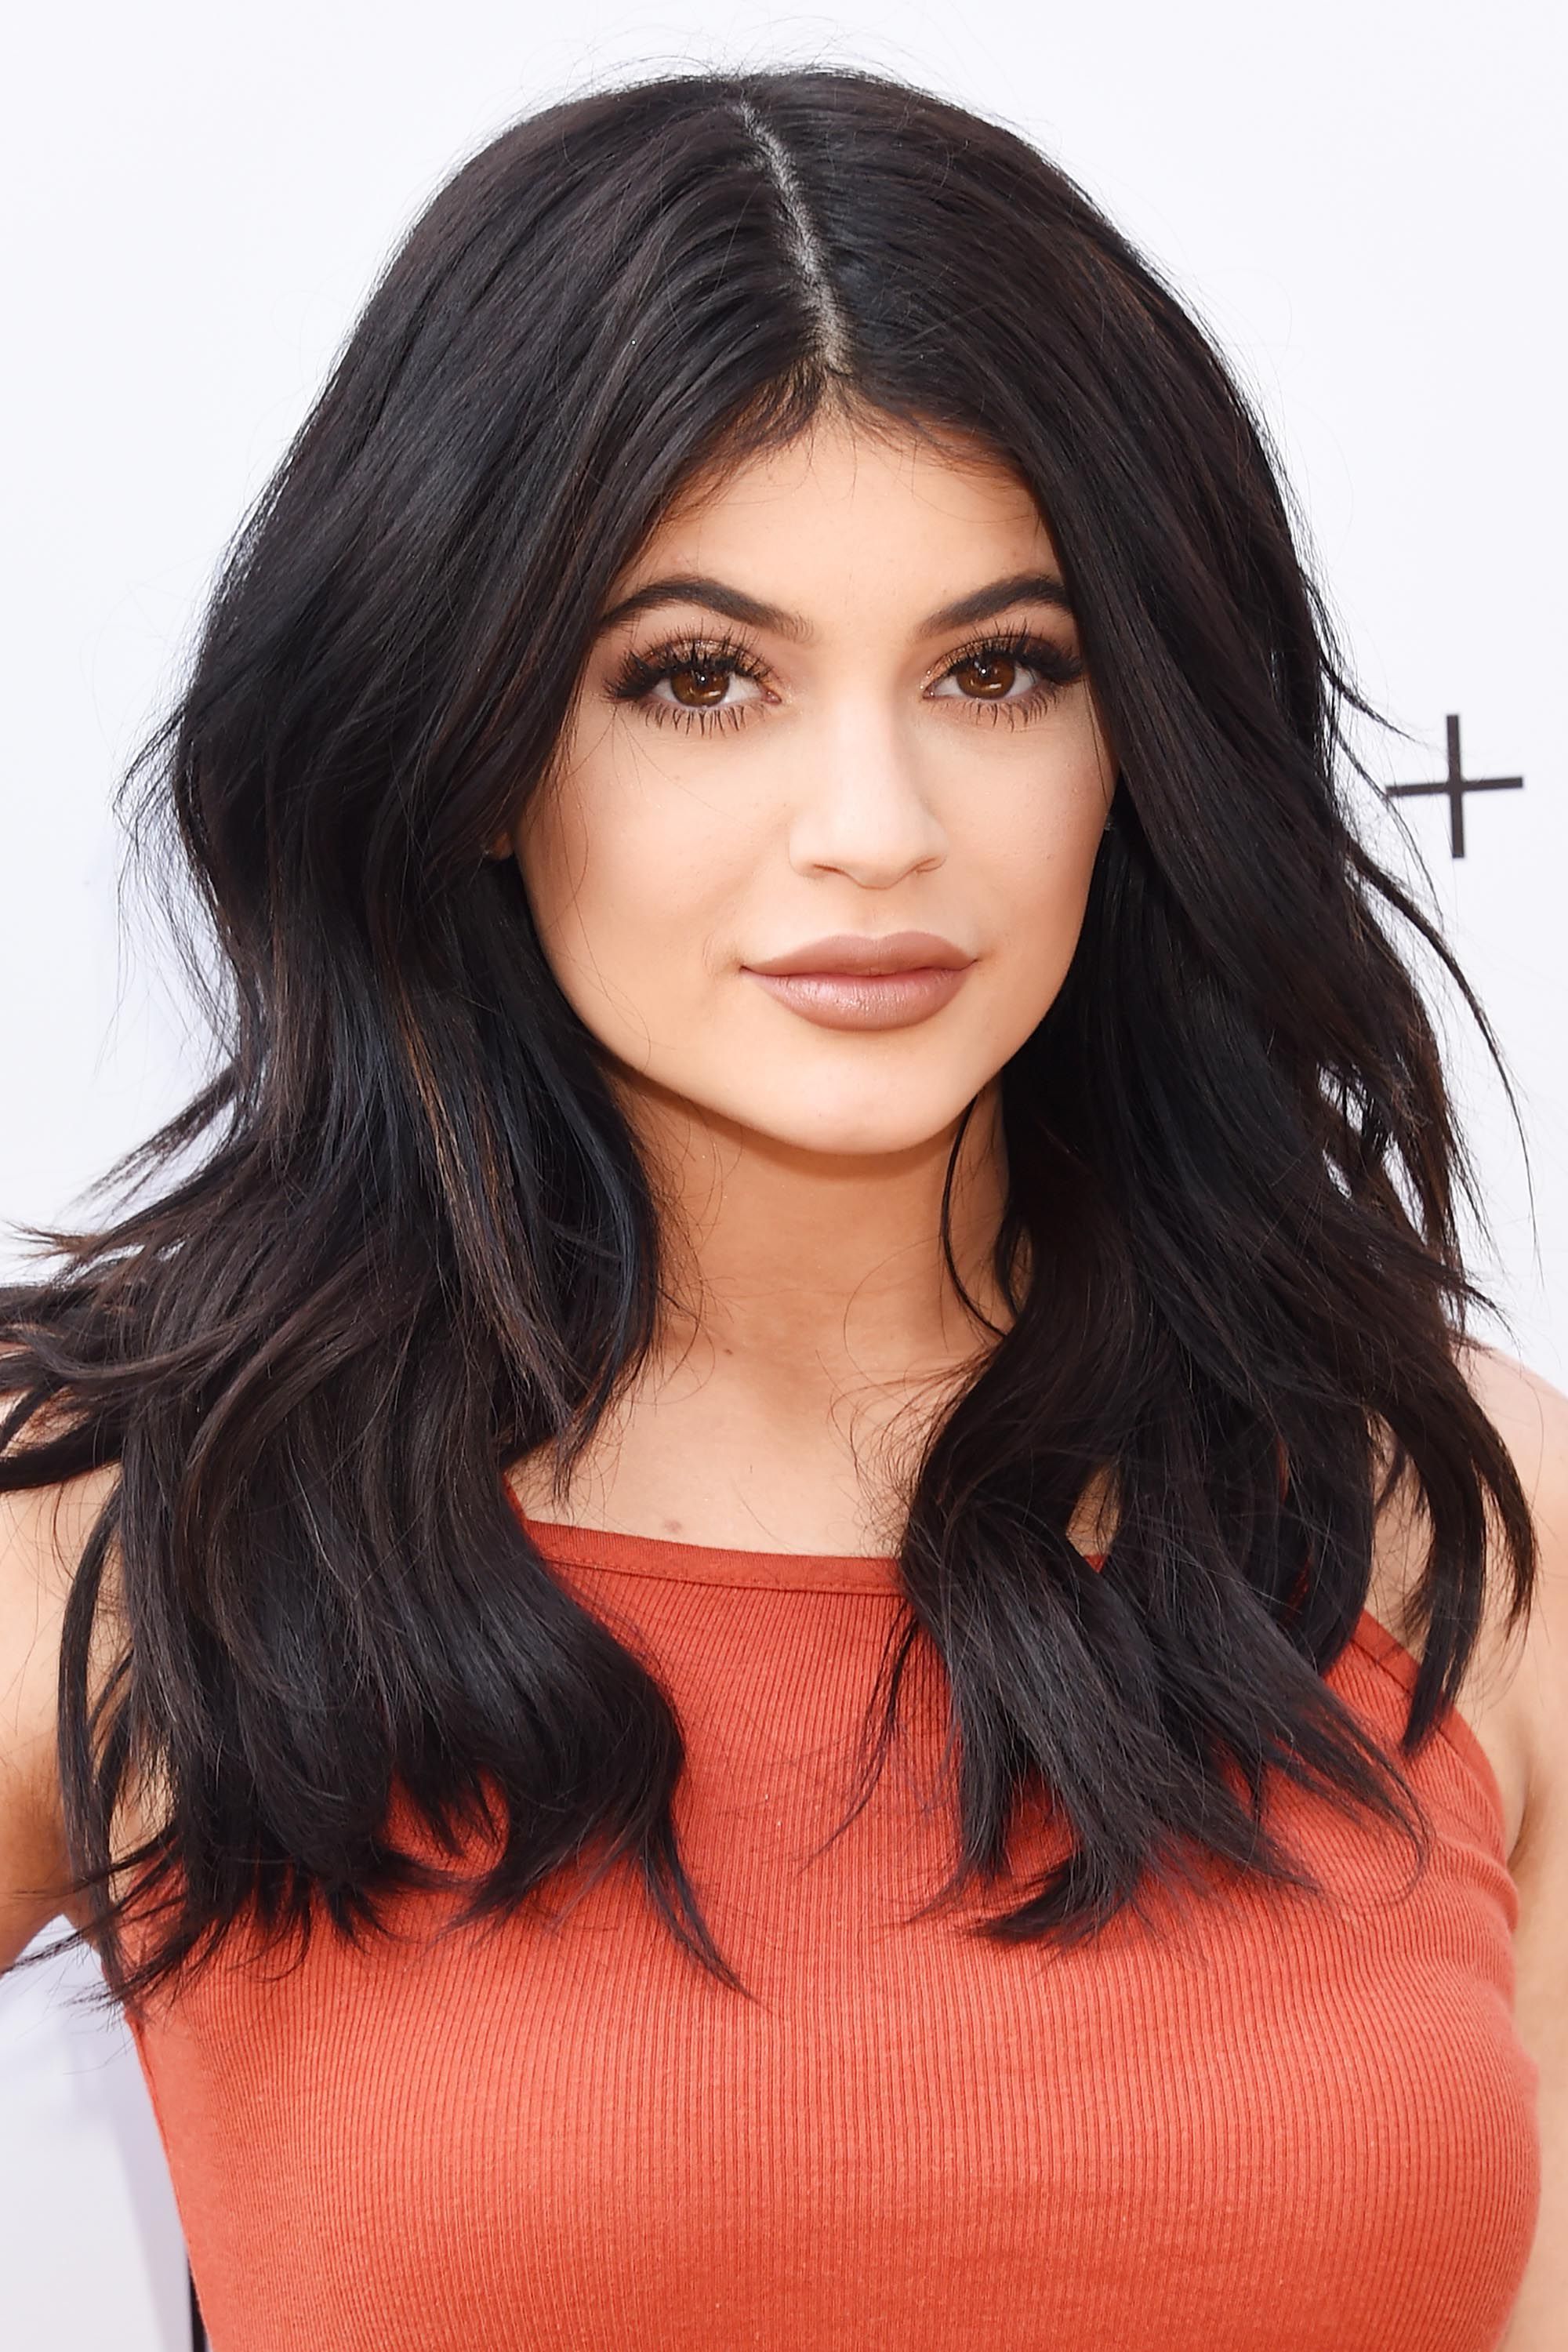 Widely Used Kris Jenner Medium Hairstyles With Regard To 50 Best Kylie Jenner Hair Looks – The Best Hairstyles Of Kylie Jenner (View 4 of 20)